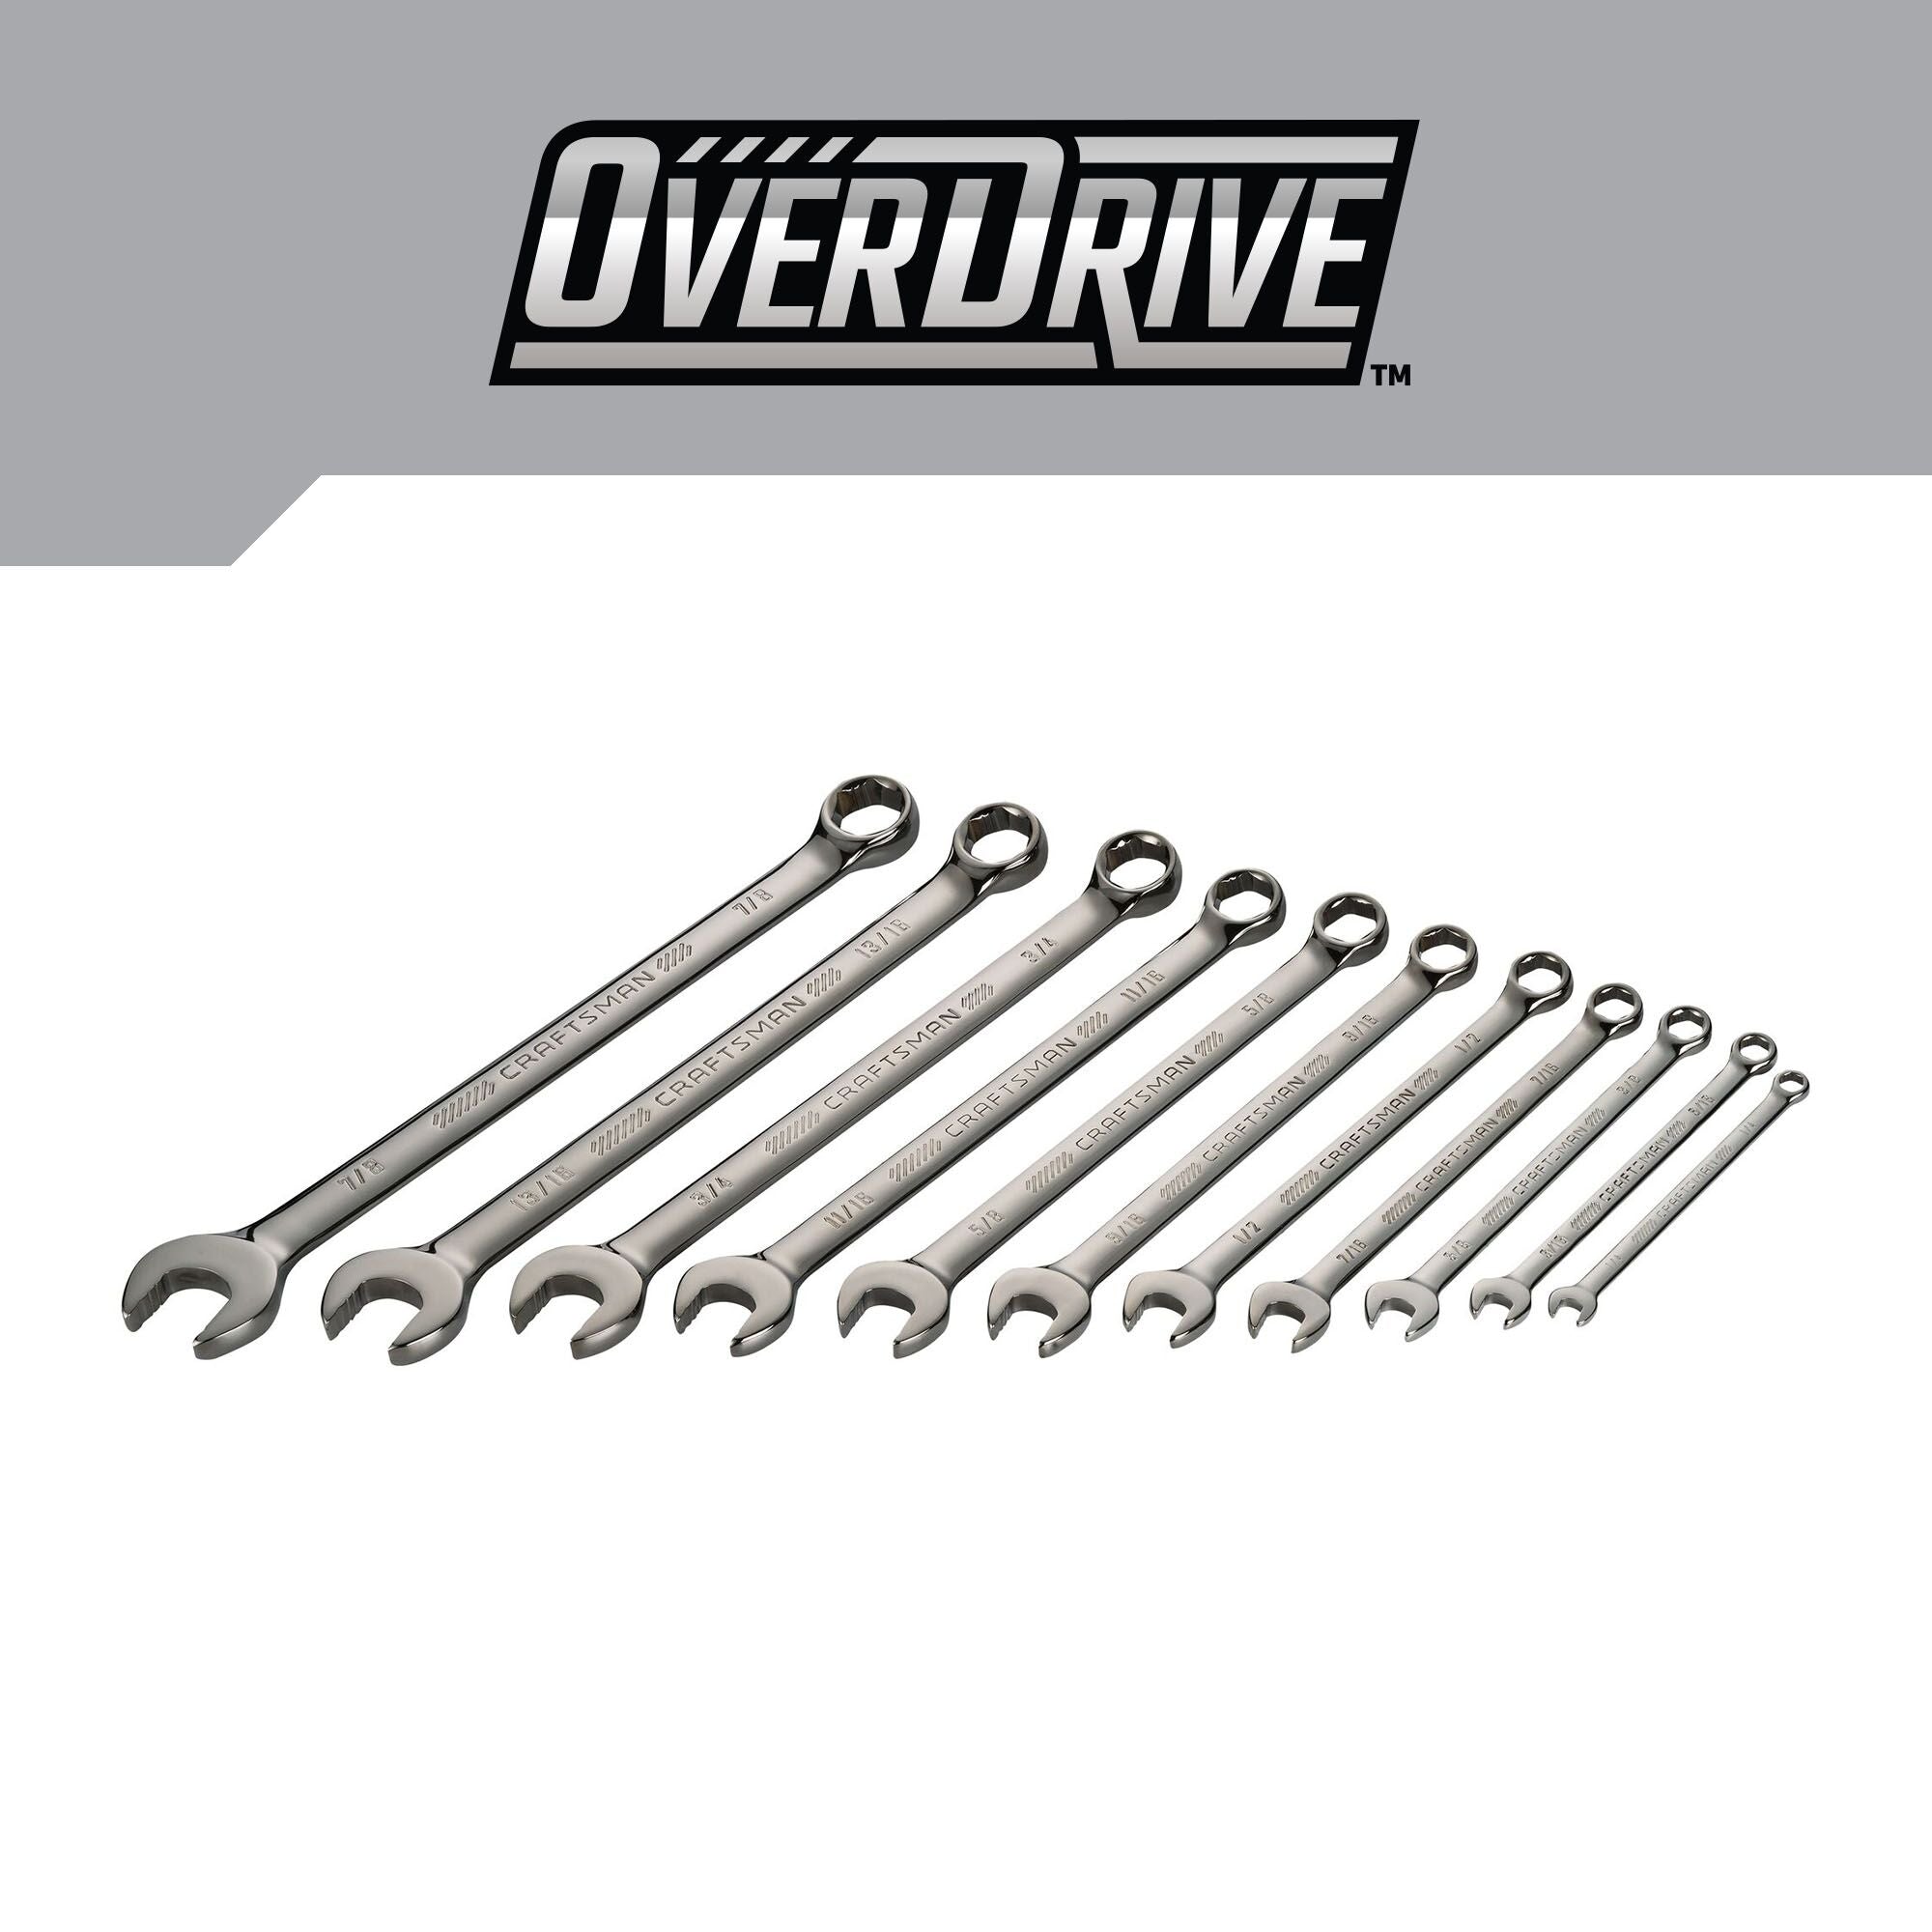 CRAFTSMAN OVERDRIVE 11 PIECE WRENCH SET product on white background